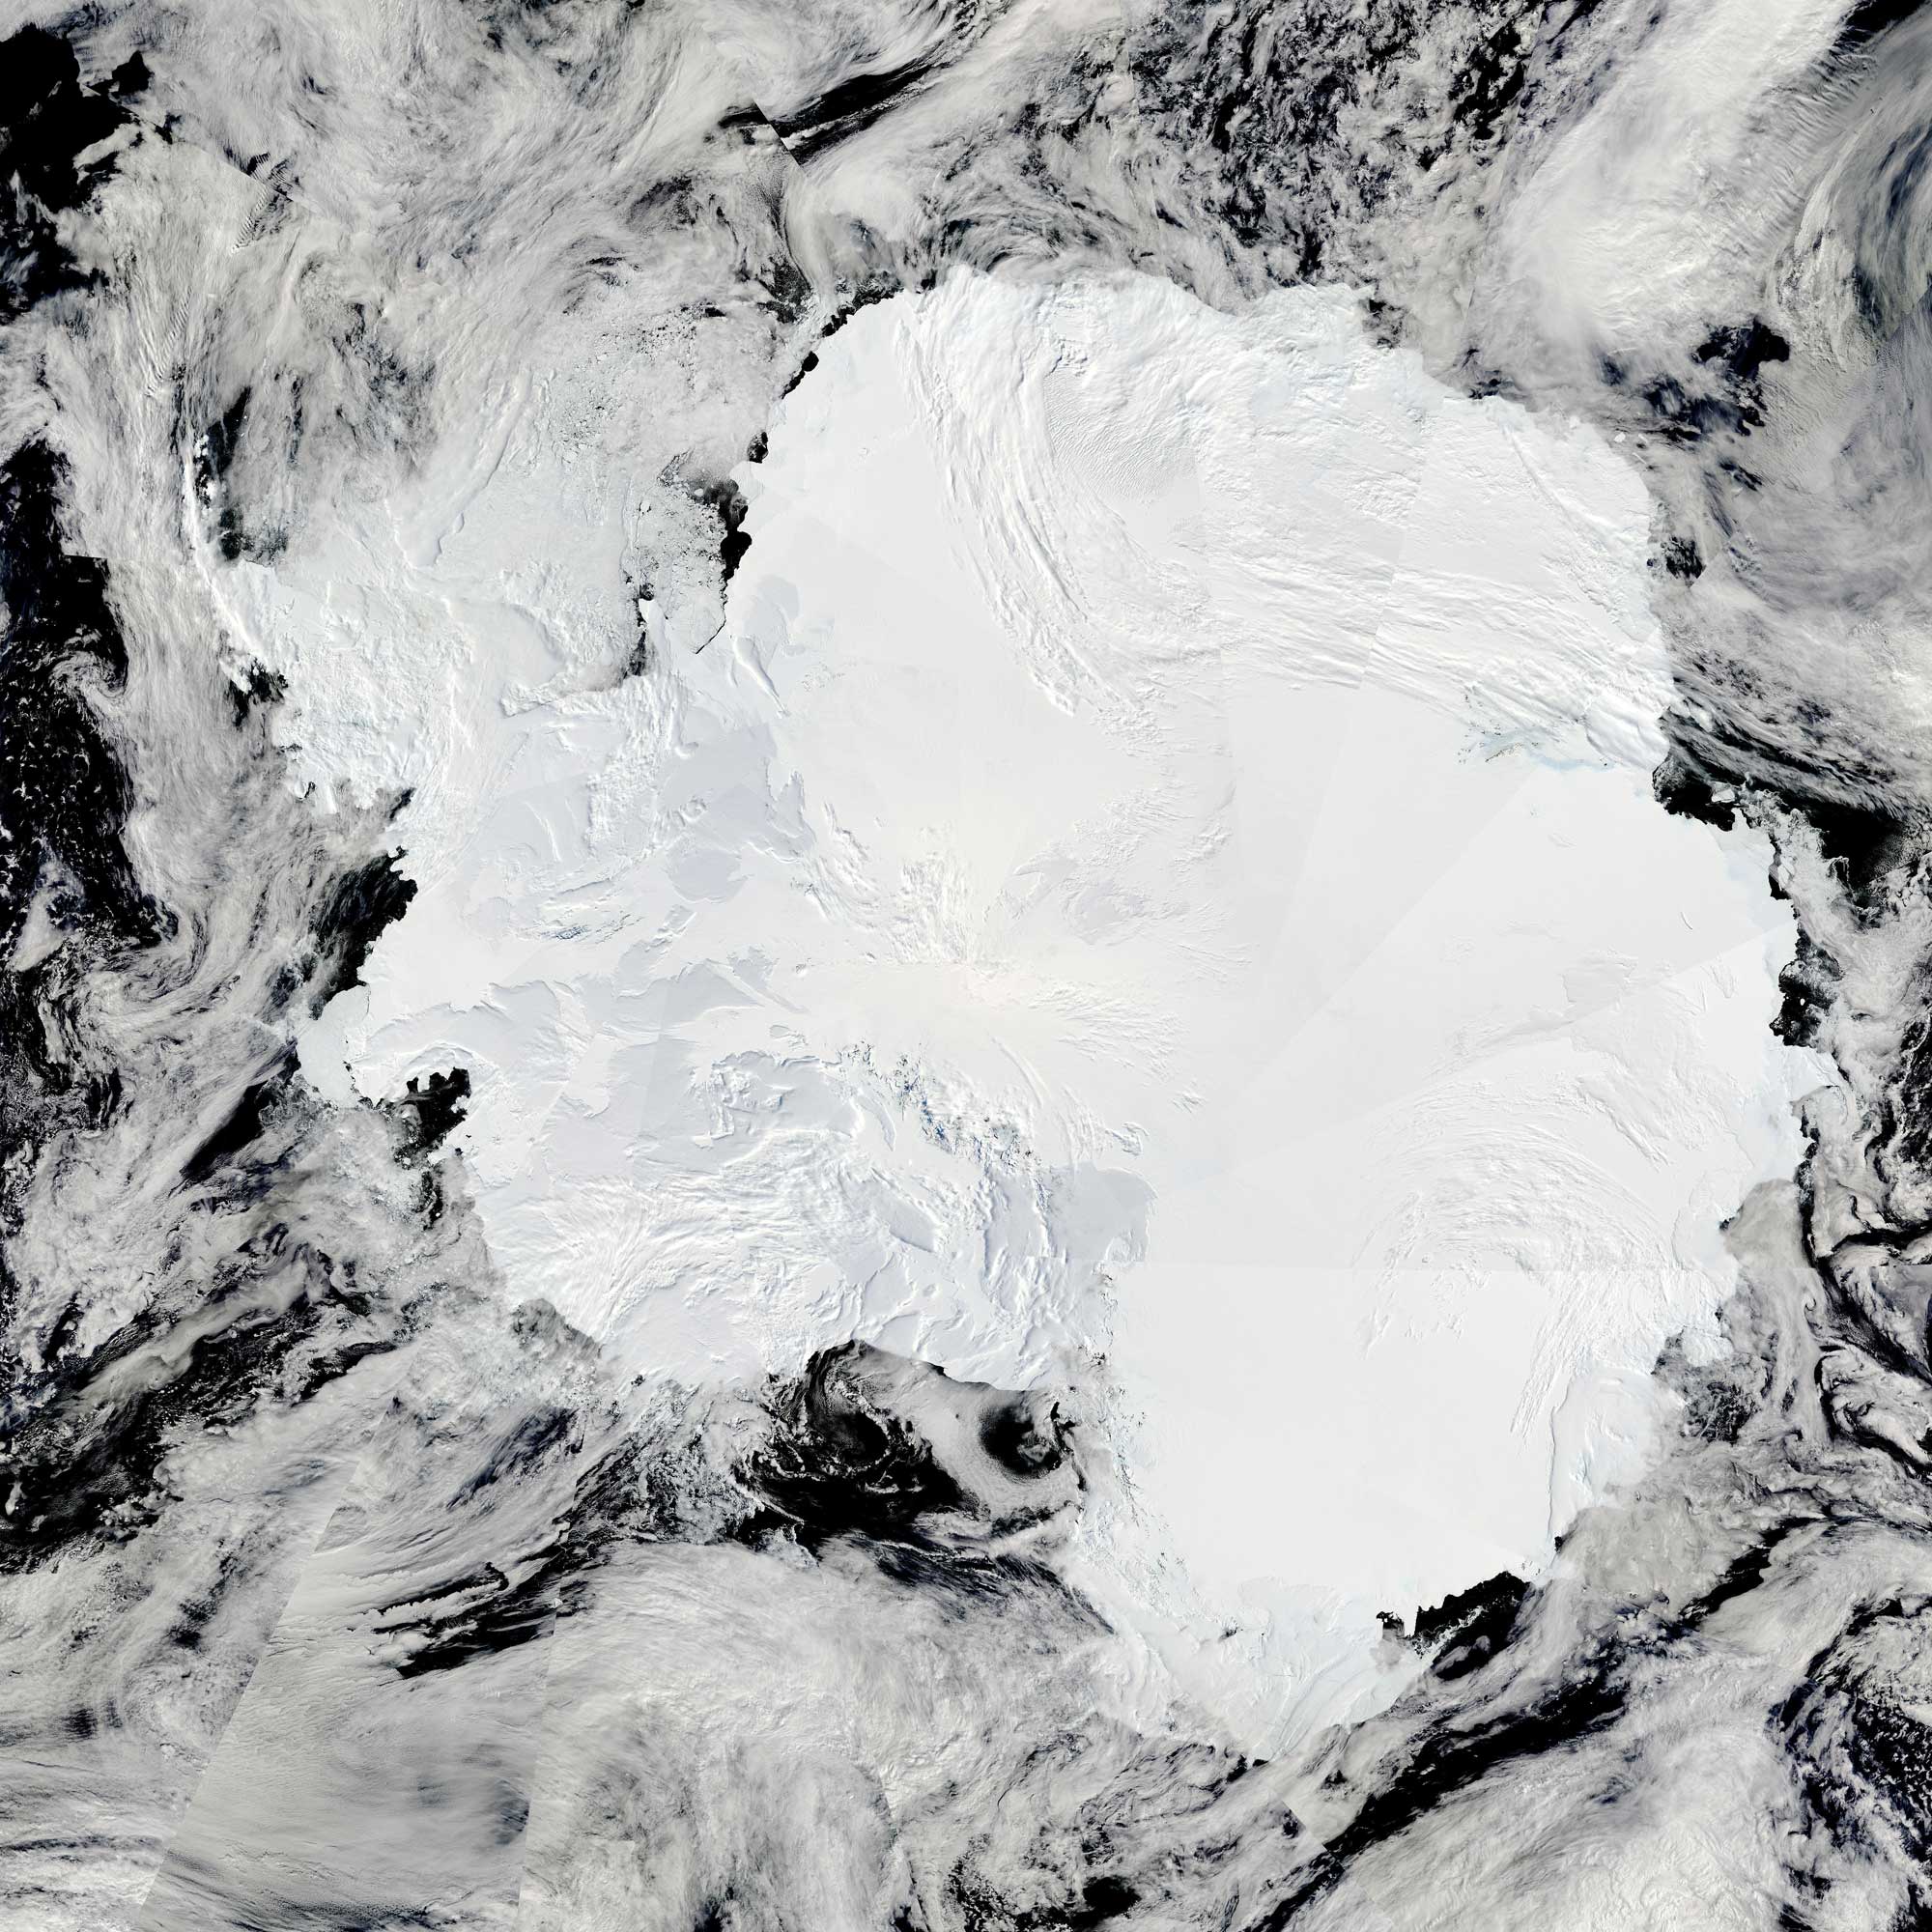 Satellite image of Antarctica showing that the continent is entirely covered with a layer of white snow and ice.